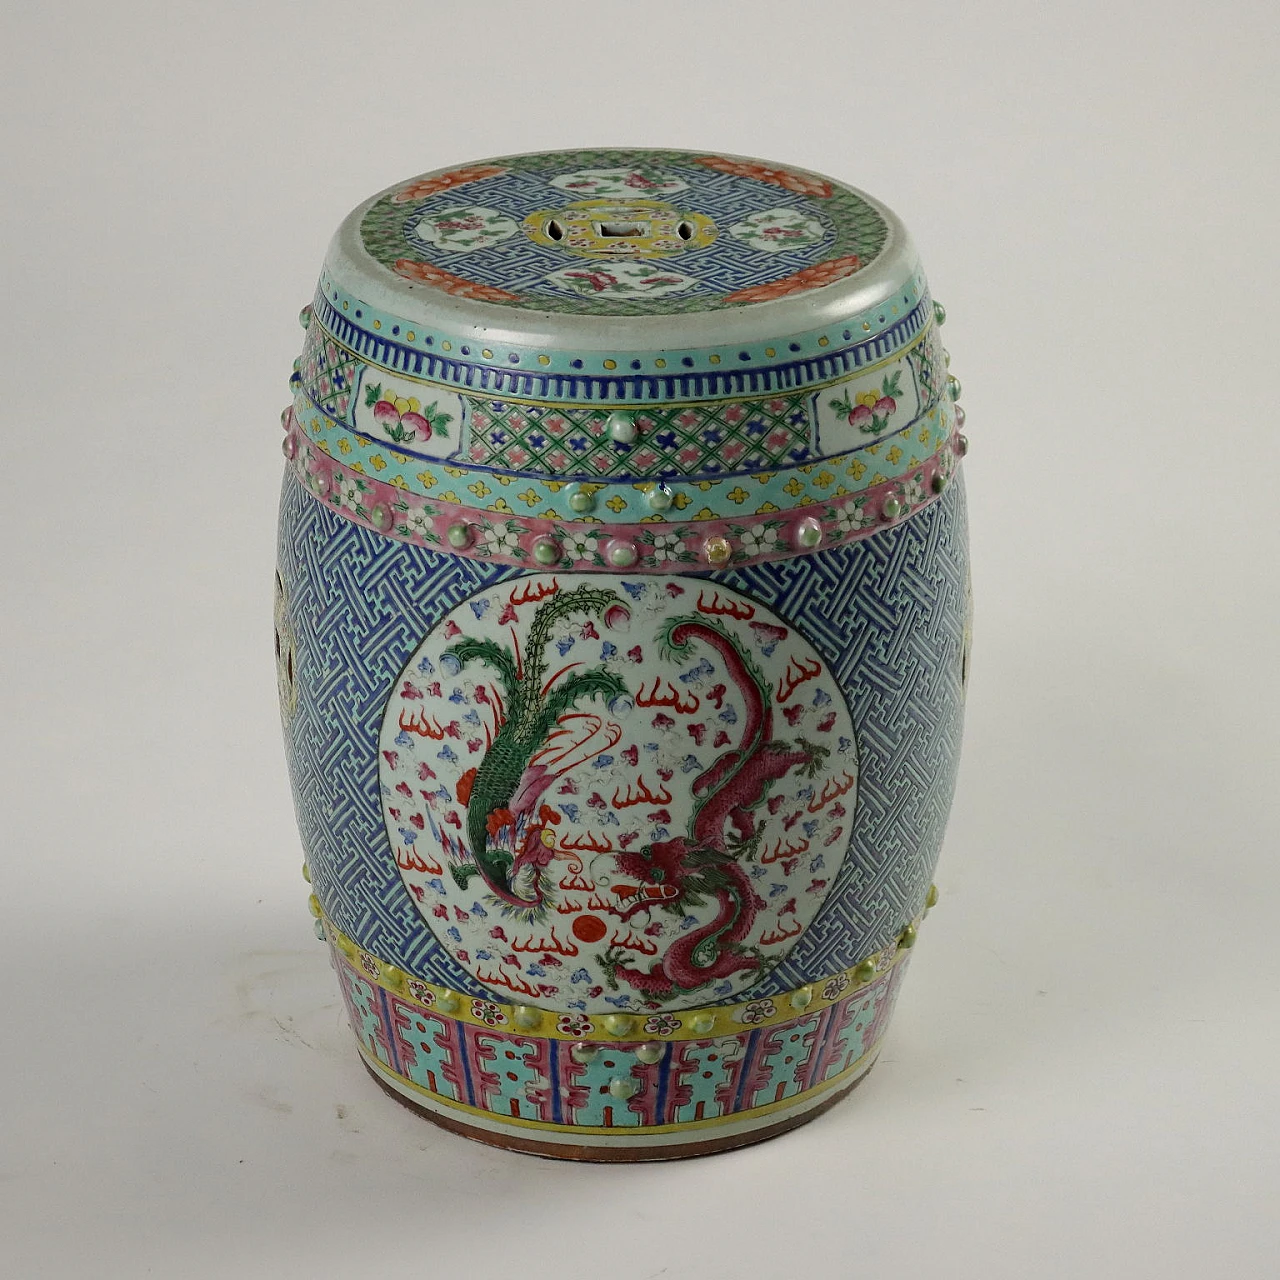 Porcelain stool decorated with dragon and phoenix, 19th century 8